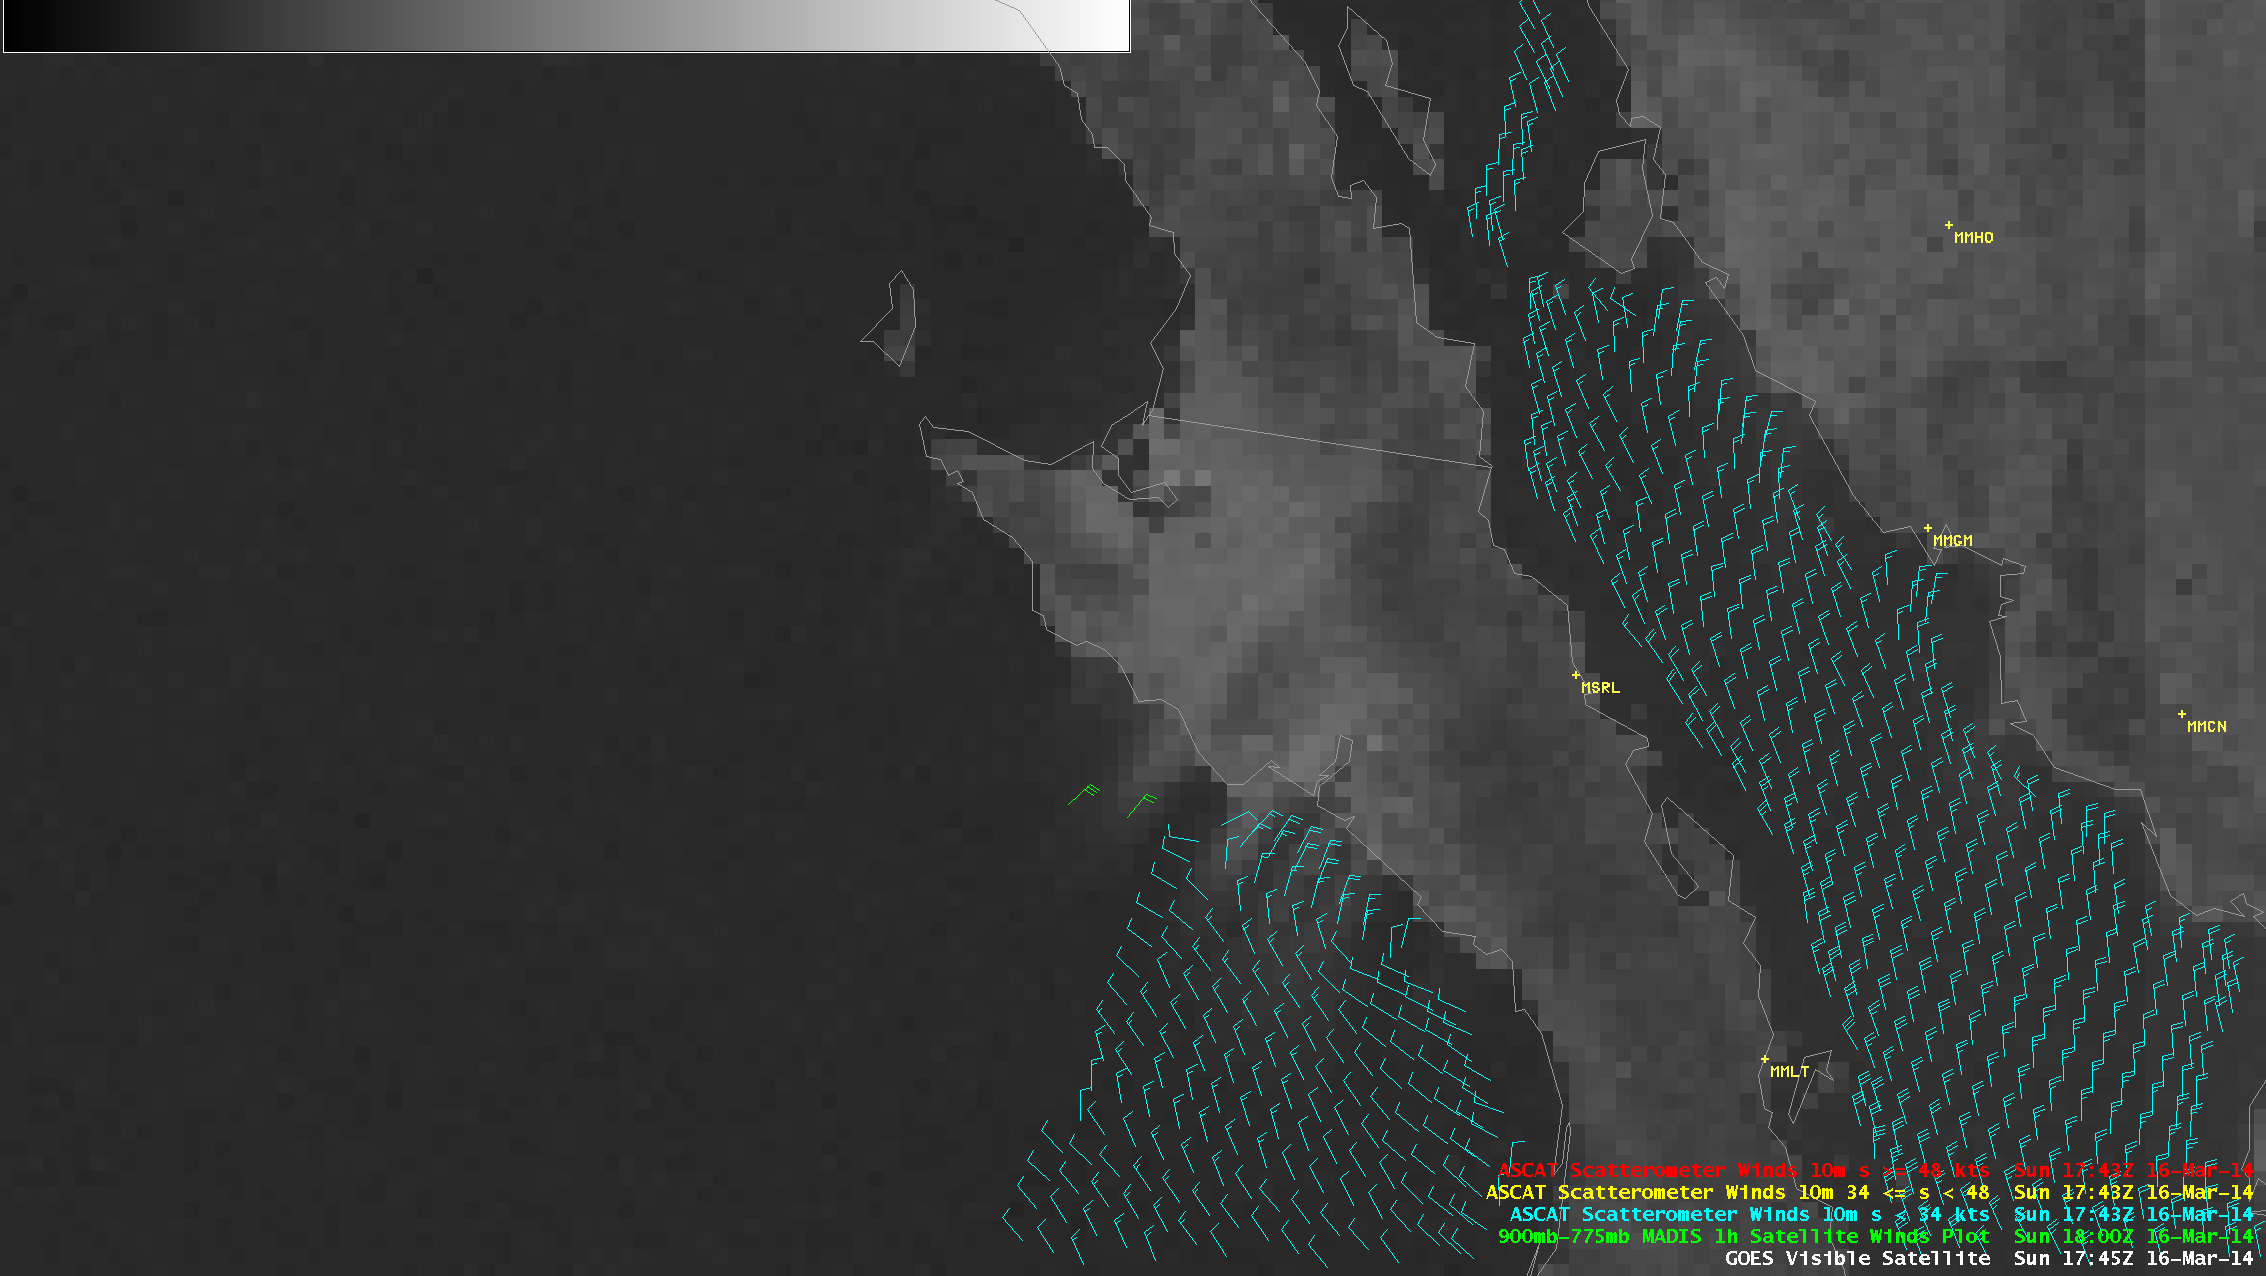 GOES-15 0.63 Âµm visible image with GOES-15 satellite-derived winds and Metop ASCAT surface scatterometer winds